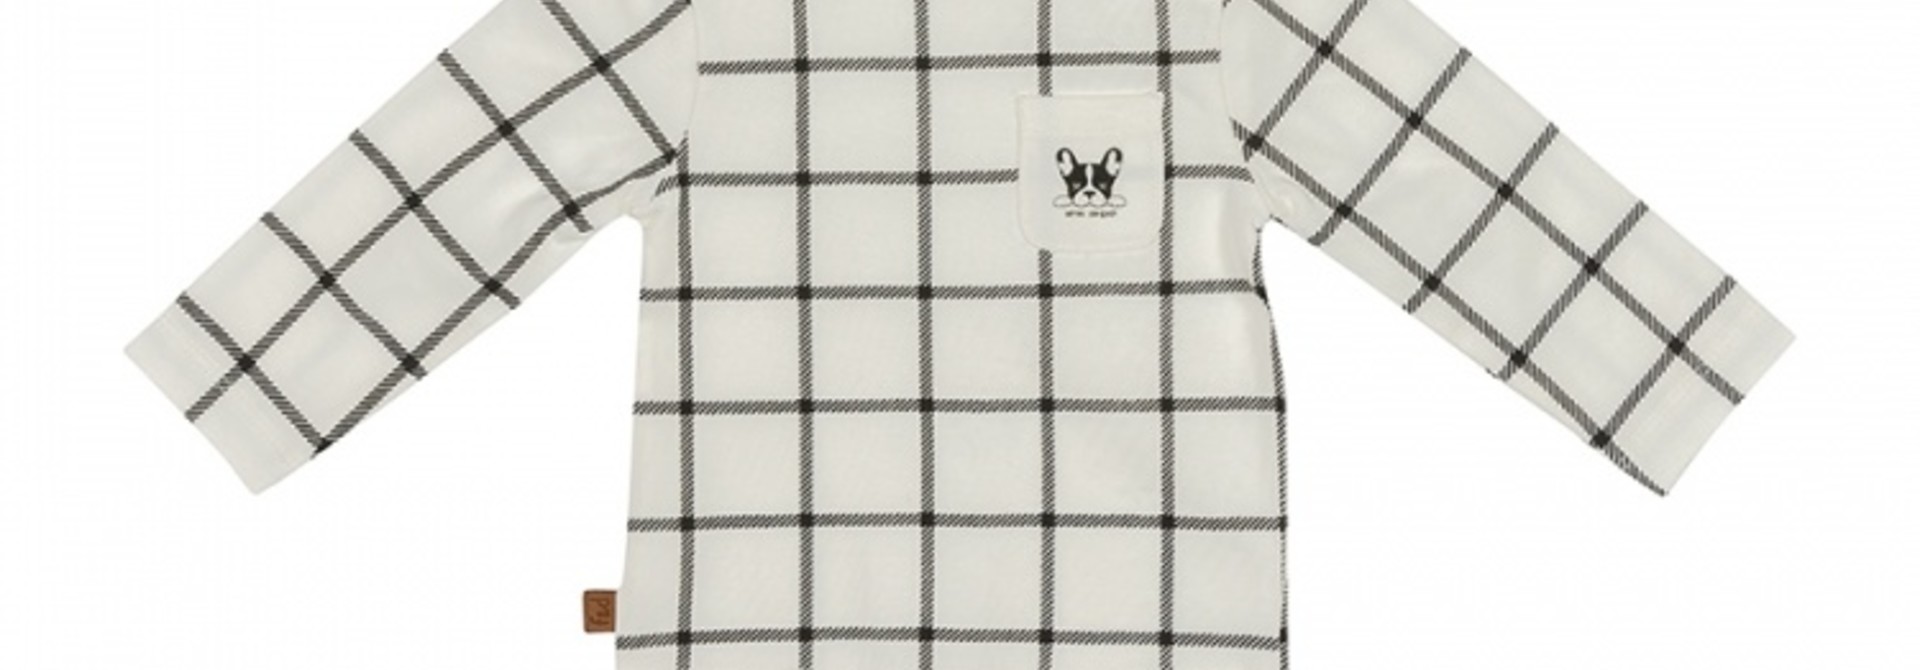 Frogs&Dogs - Playtime Shirt Checks